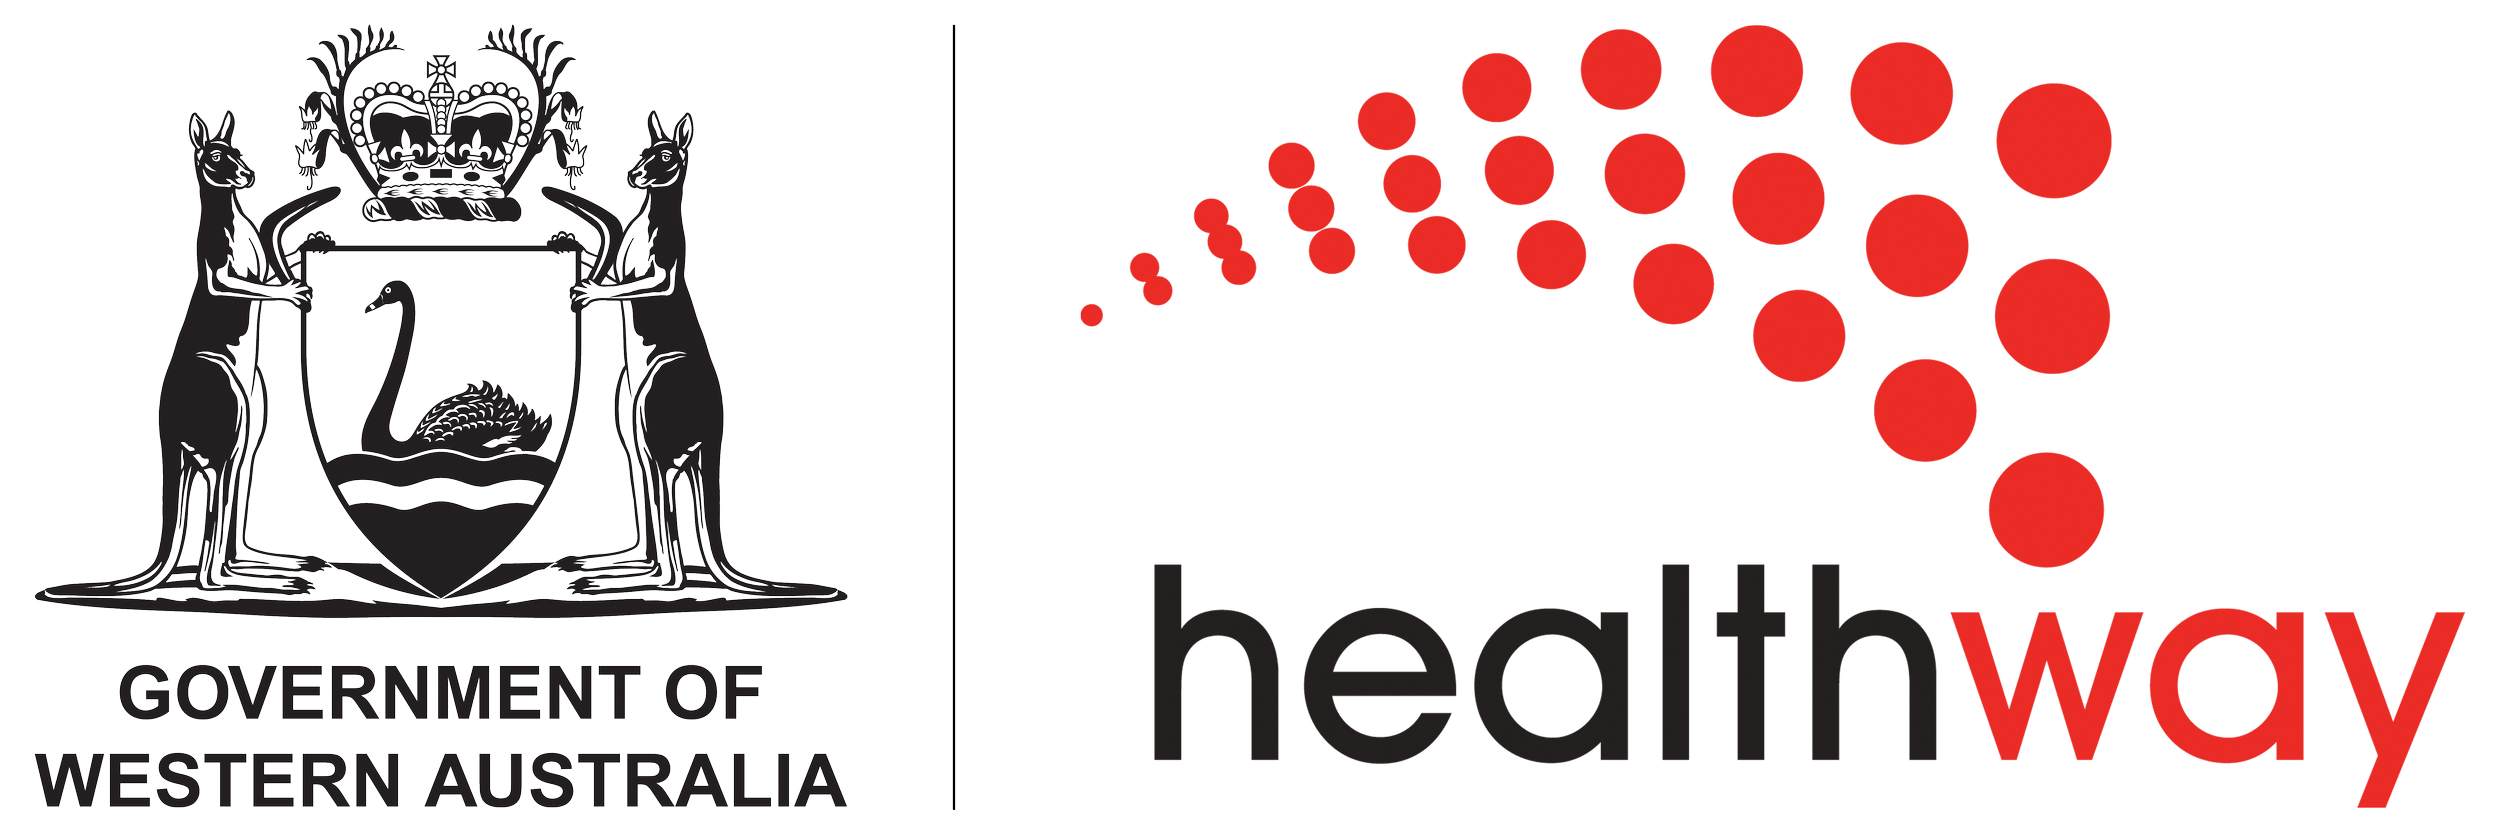 STATE COAT OF ARMS AND HEALTHWAY LOGO.png